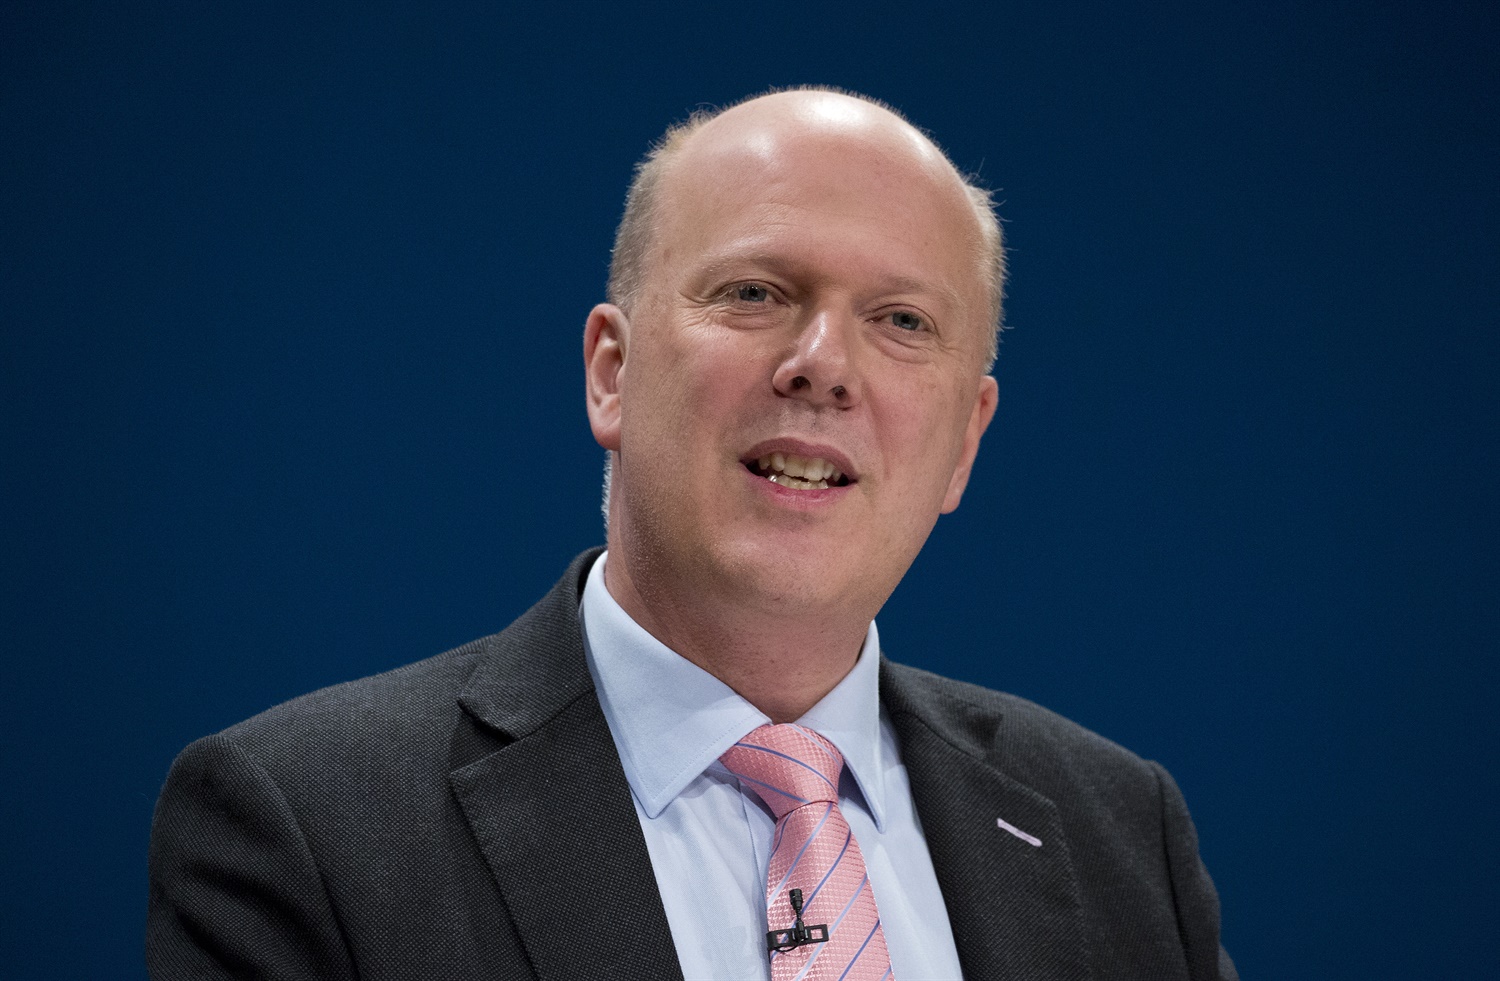 A transport network ‘on its knees’ is slowly catching up in the north, says Grayling